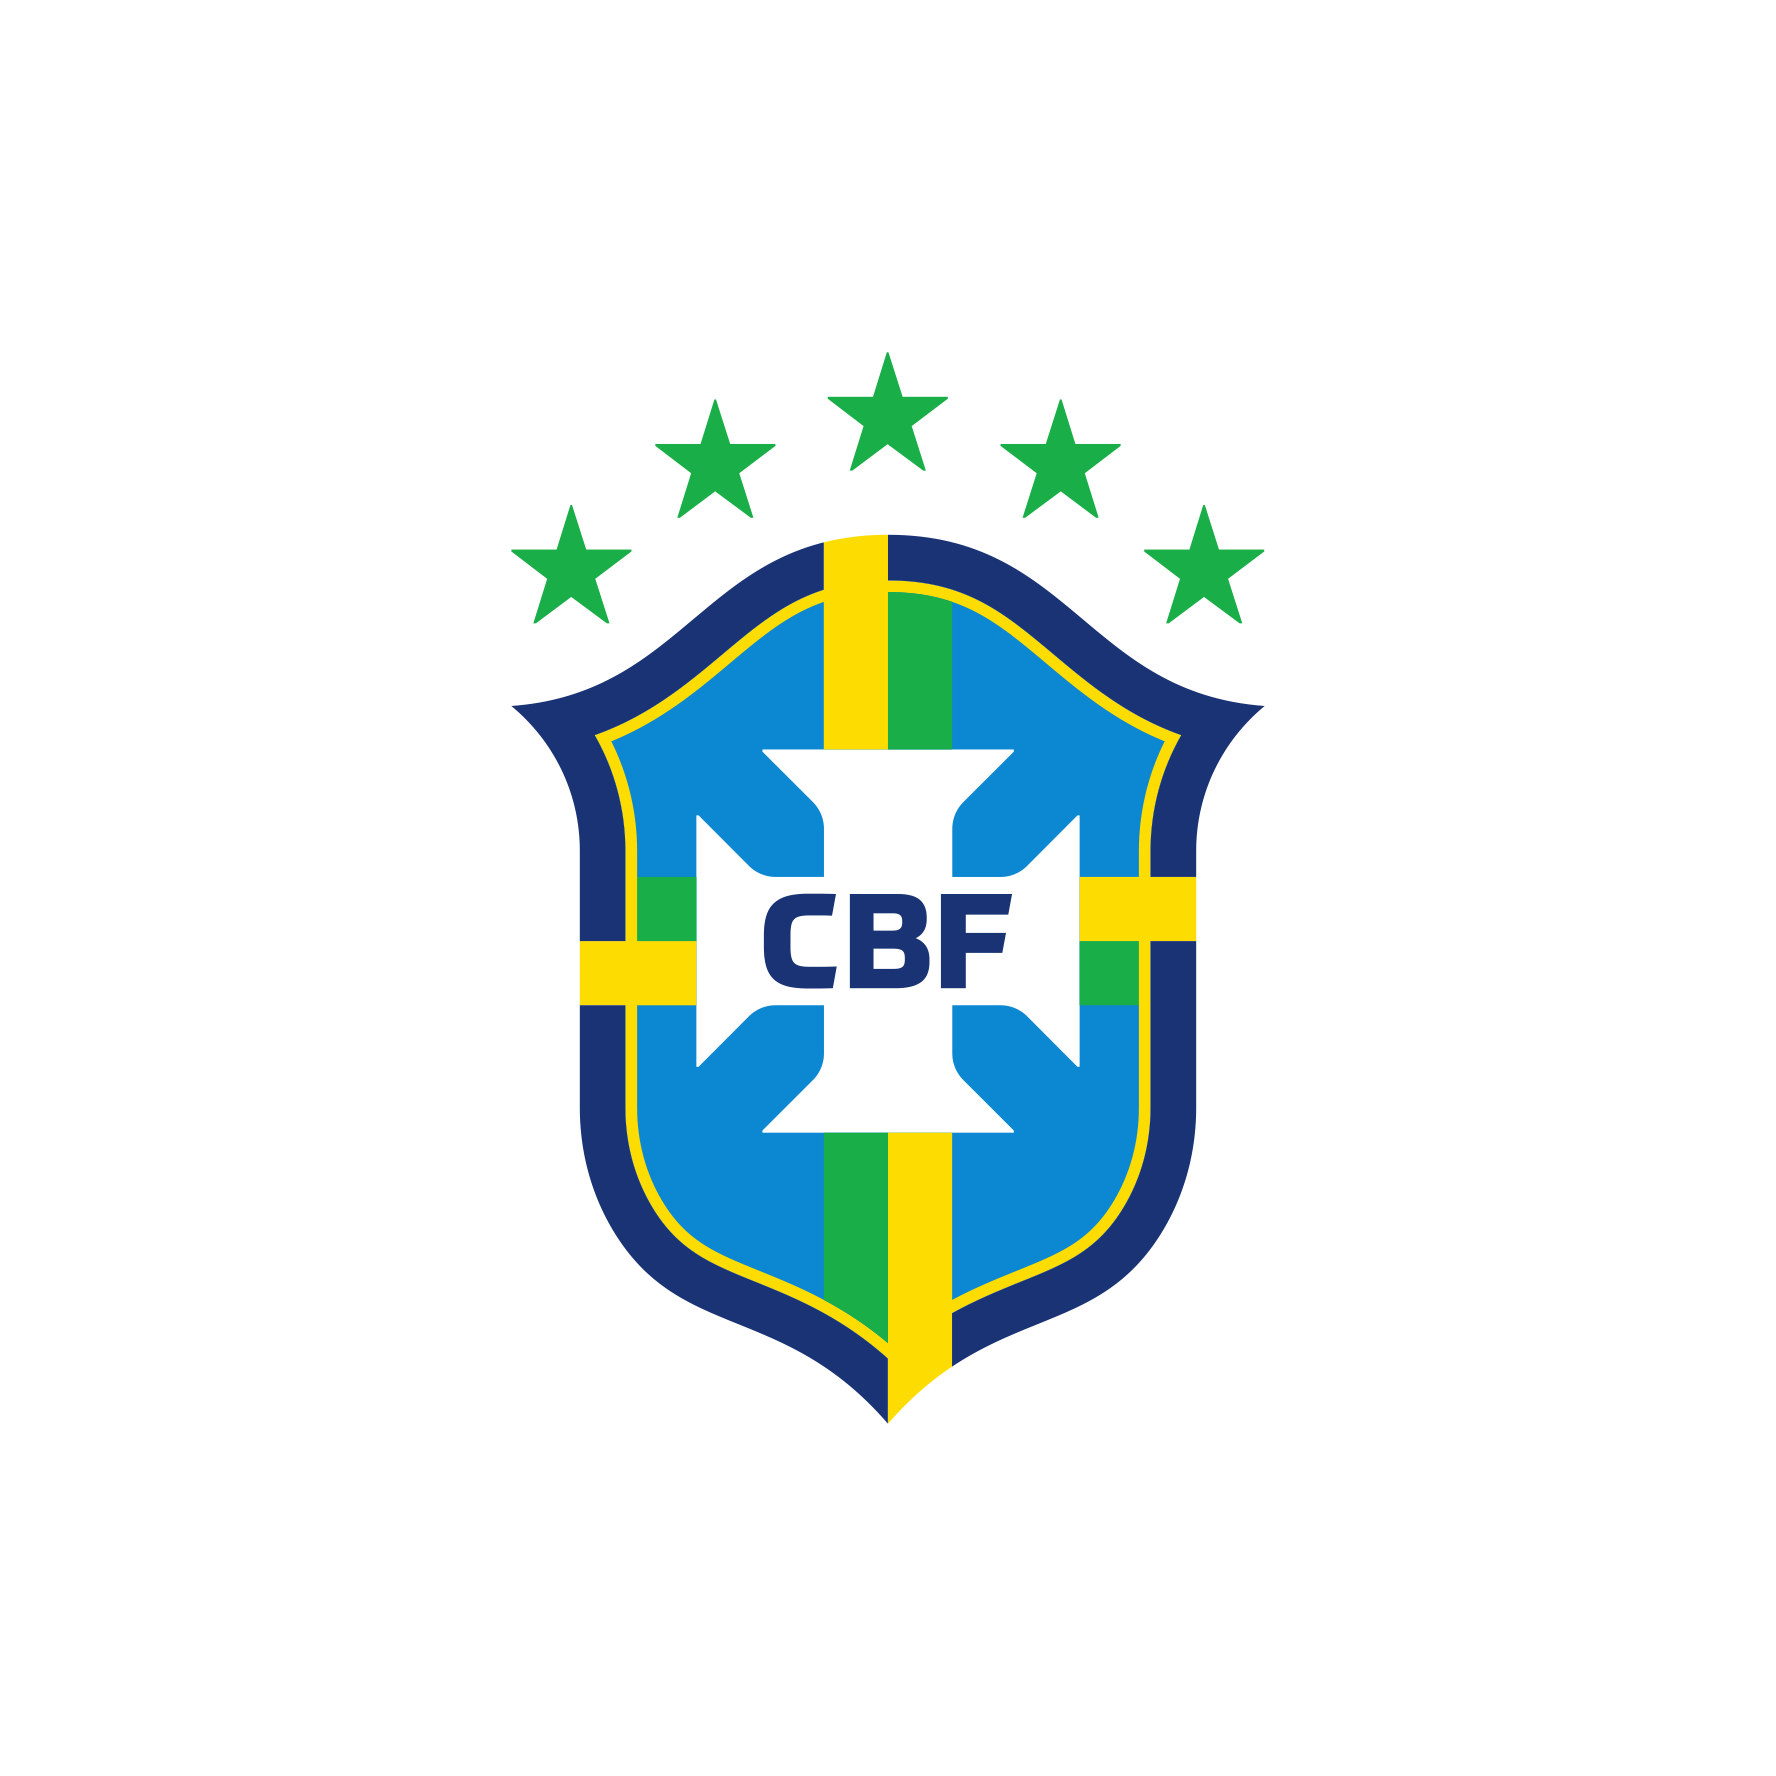 Coat of Arms of Brazil reimagined in the style of Portugal : r/heraldry